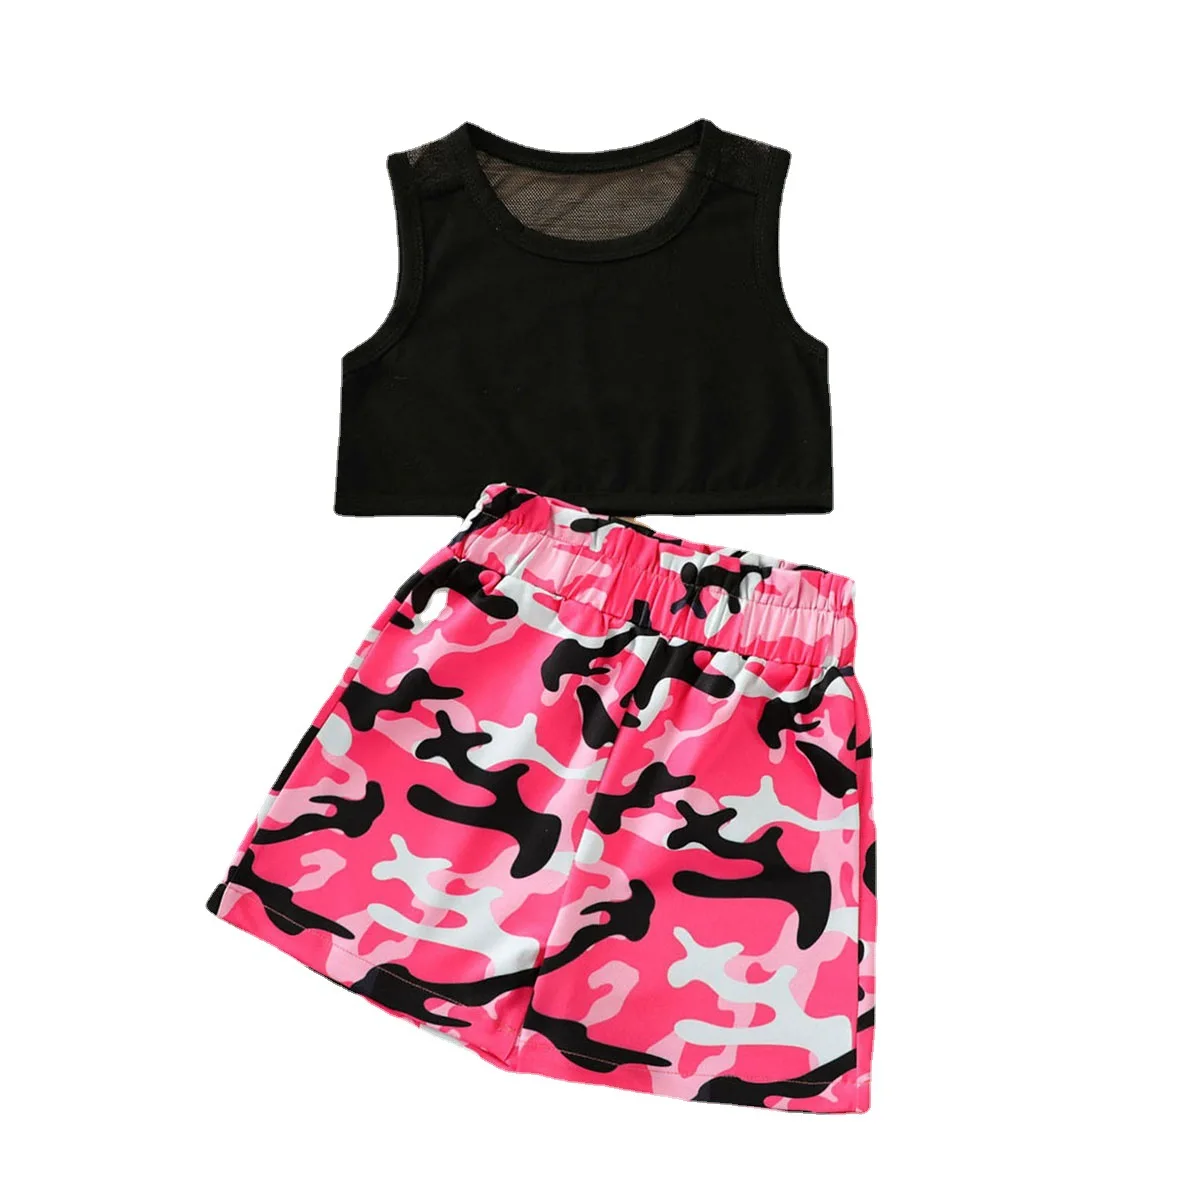 New arrival fashion toddler girls clothing sets sleeveless tops matching camouflage shorts two piece clothes for kids